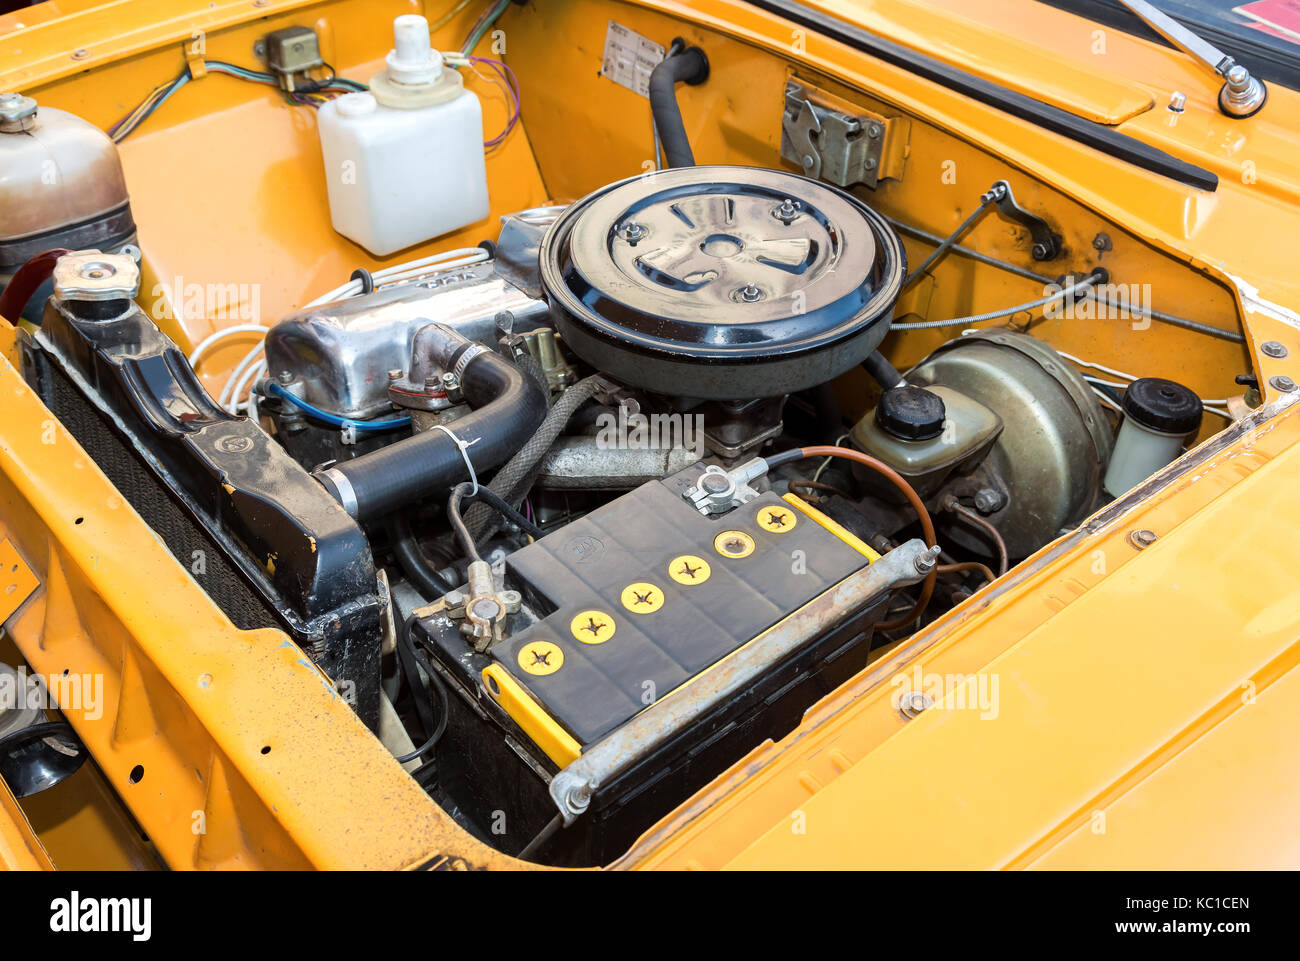 Samara, Russia - September 17, 2017: Car engine of old soviet vehicle Moskvich-412, under the hood of a retro russian car Stock Photo